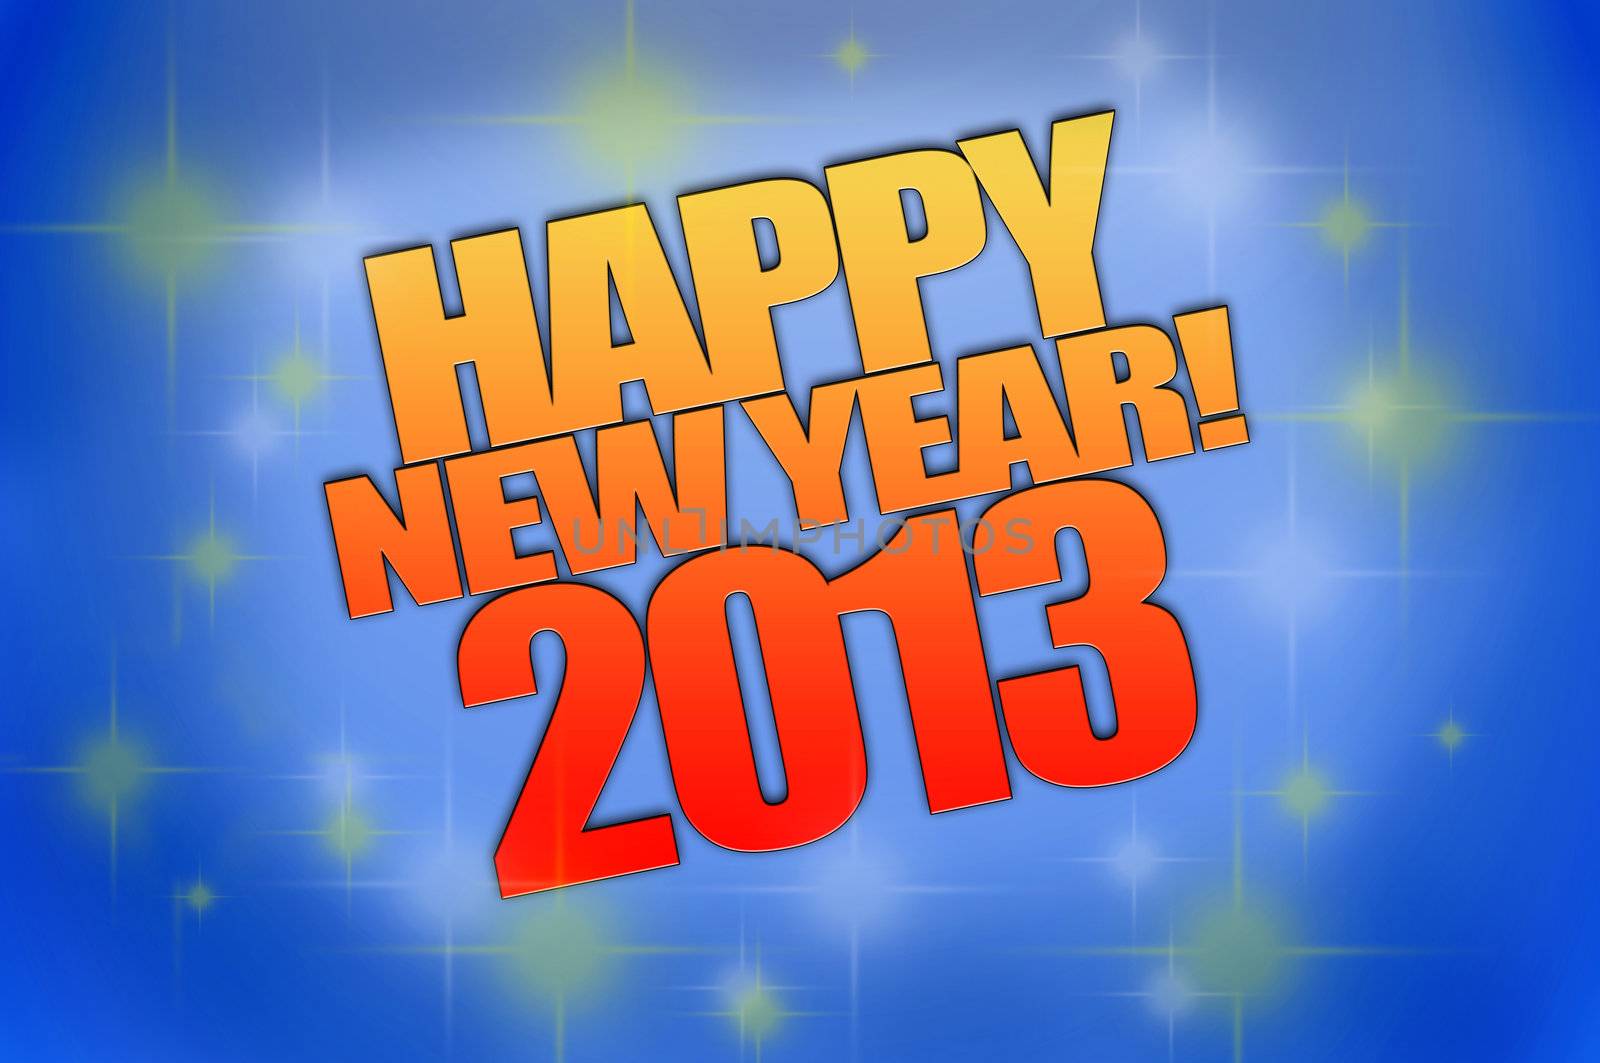 Happy New Year 2013 background computer rendered